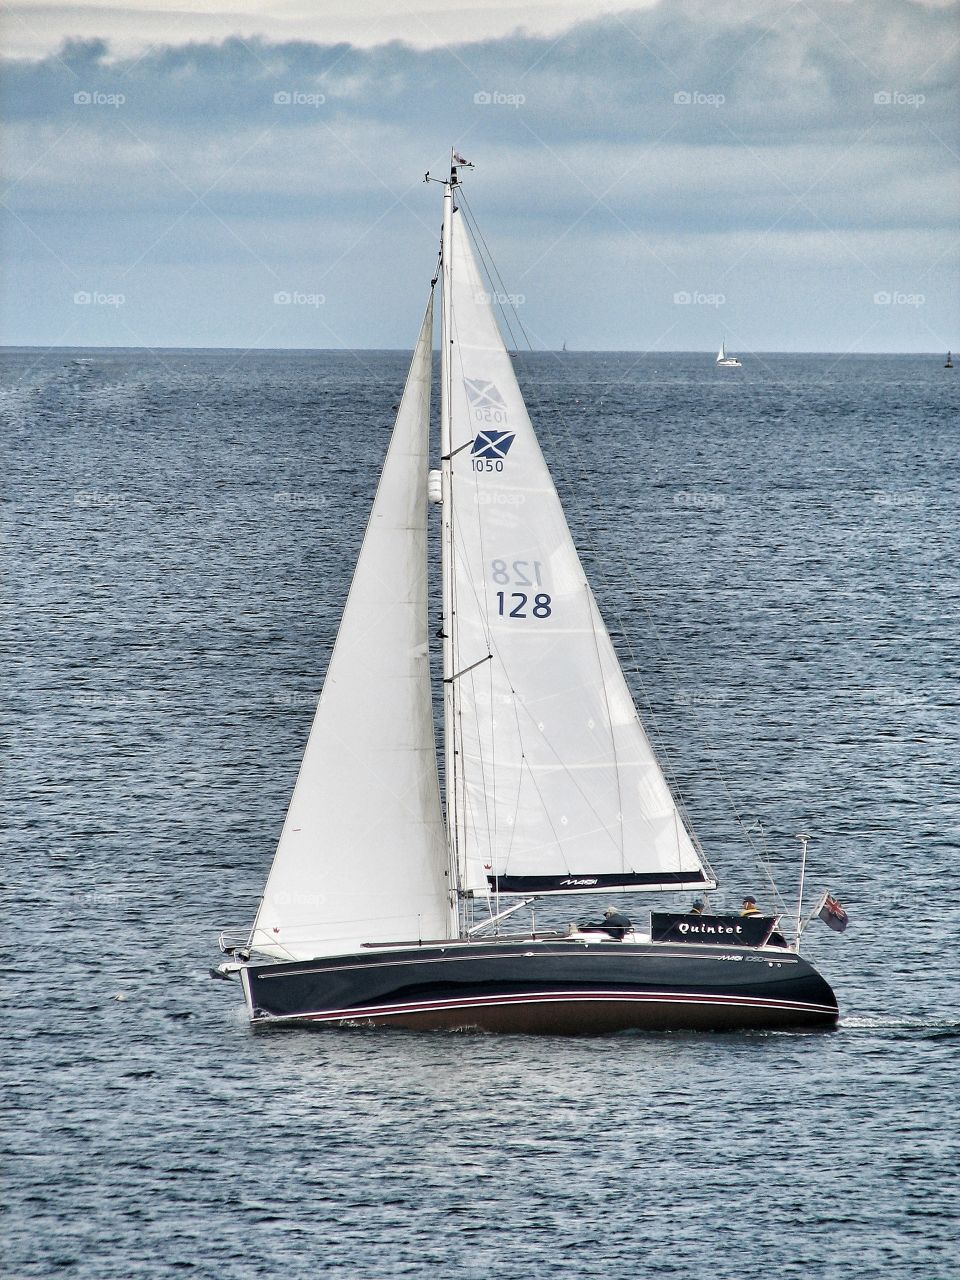 A sailing boat with a large sail corners on the ocean.